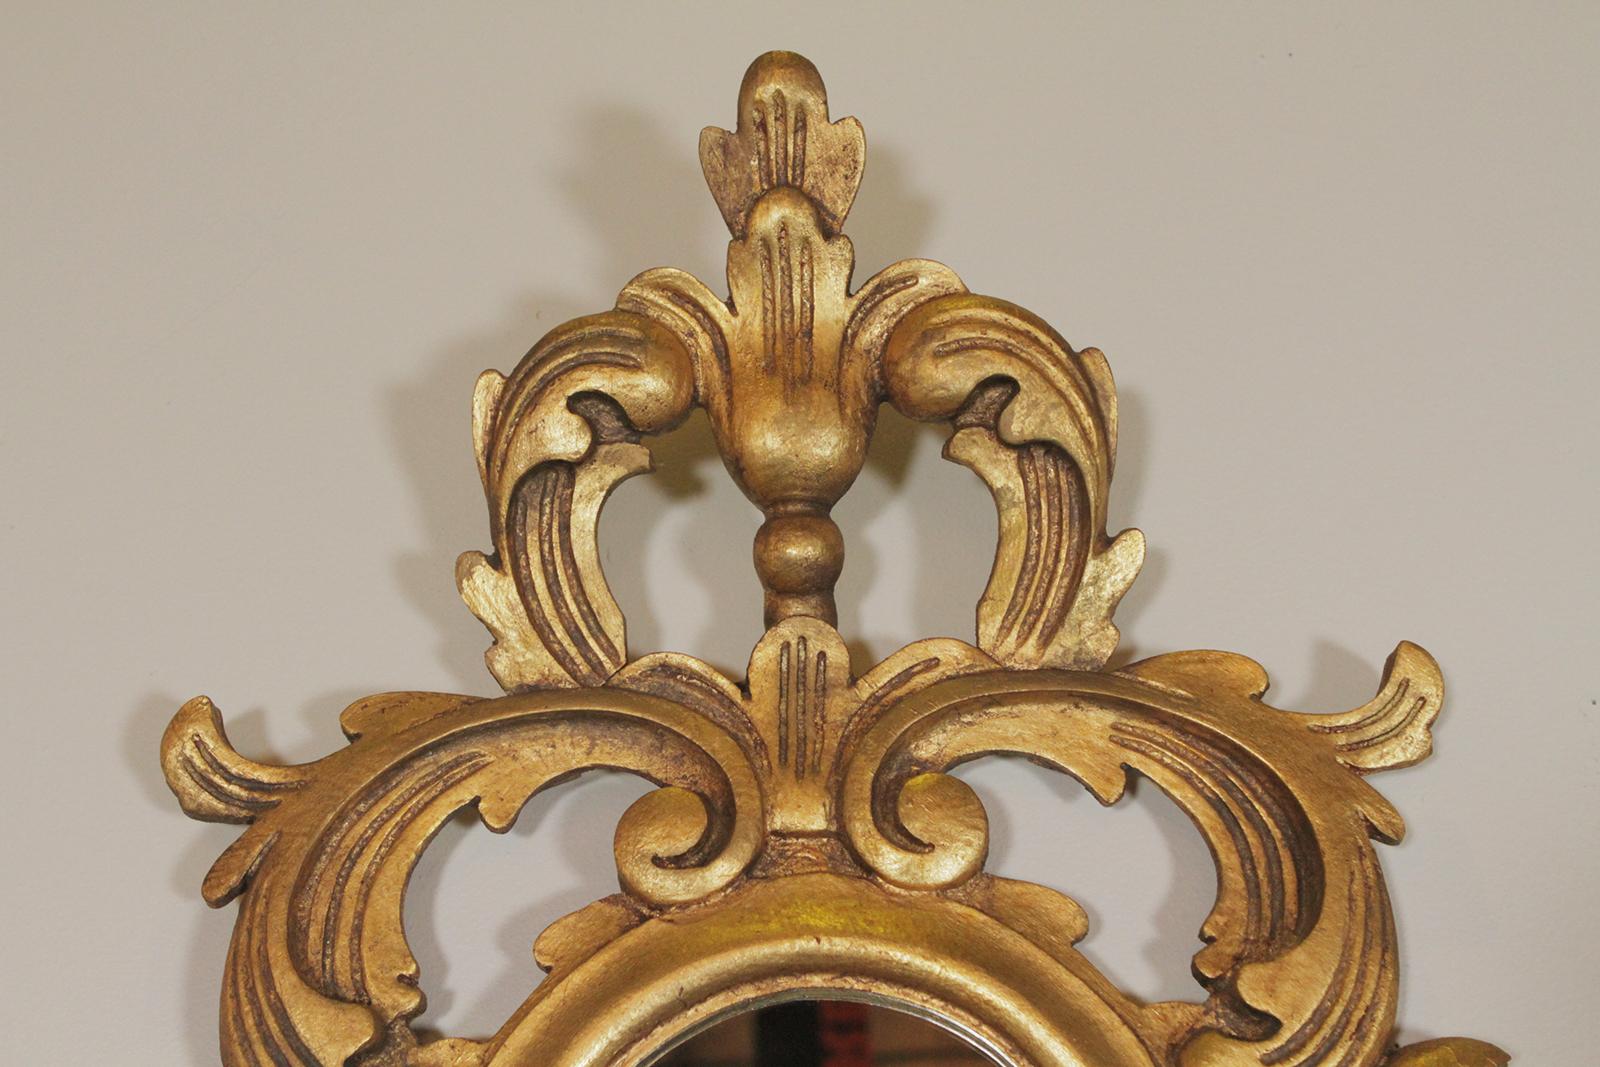 Gold gilt Rococo style carved wood mirror made in Spain
Dimensions: 31” W x 53” H, 4” D.
        